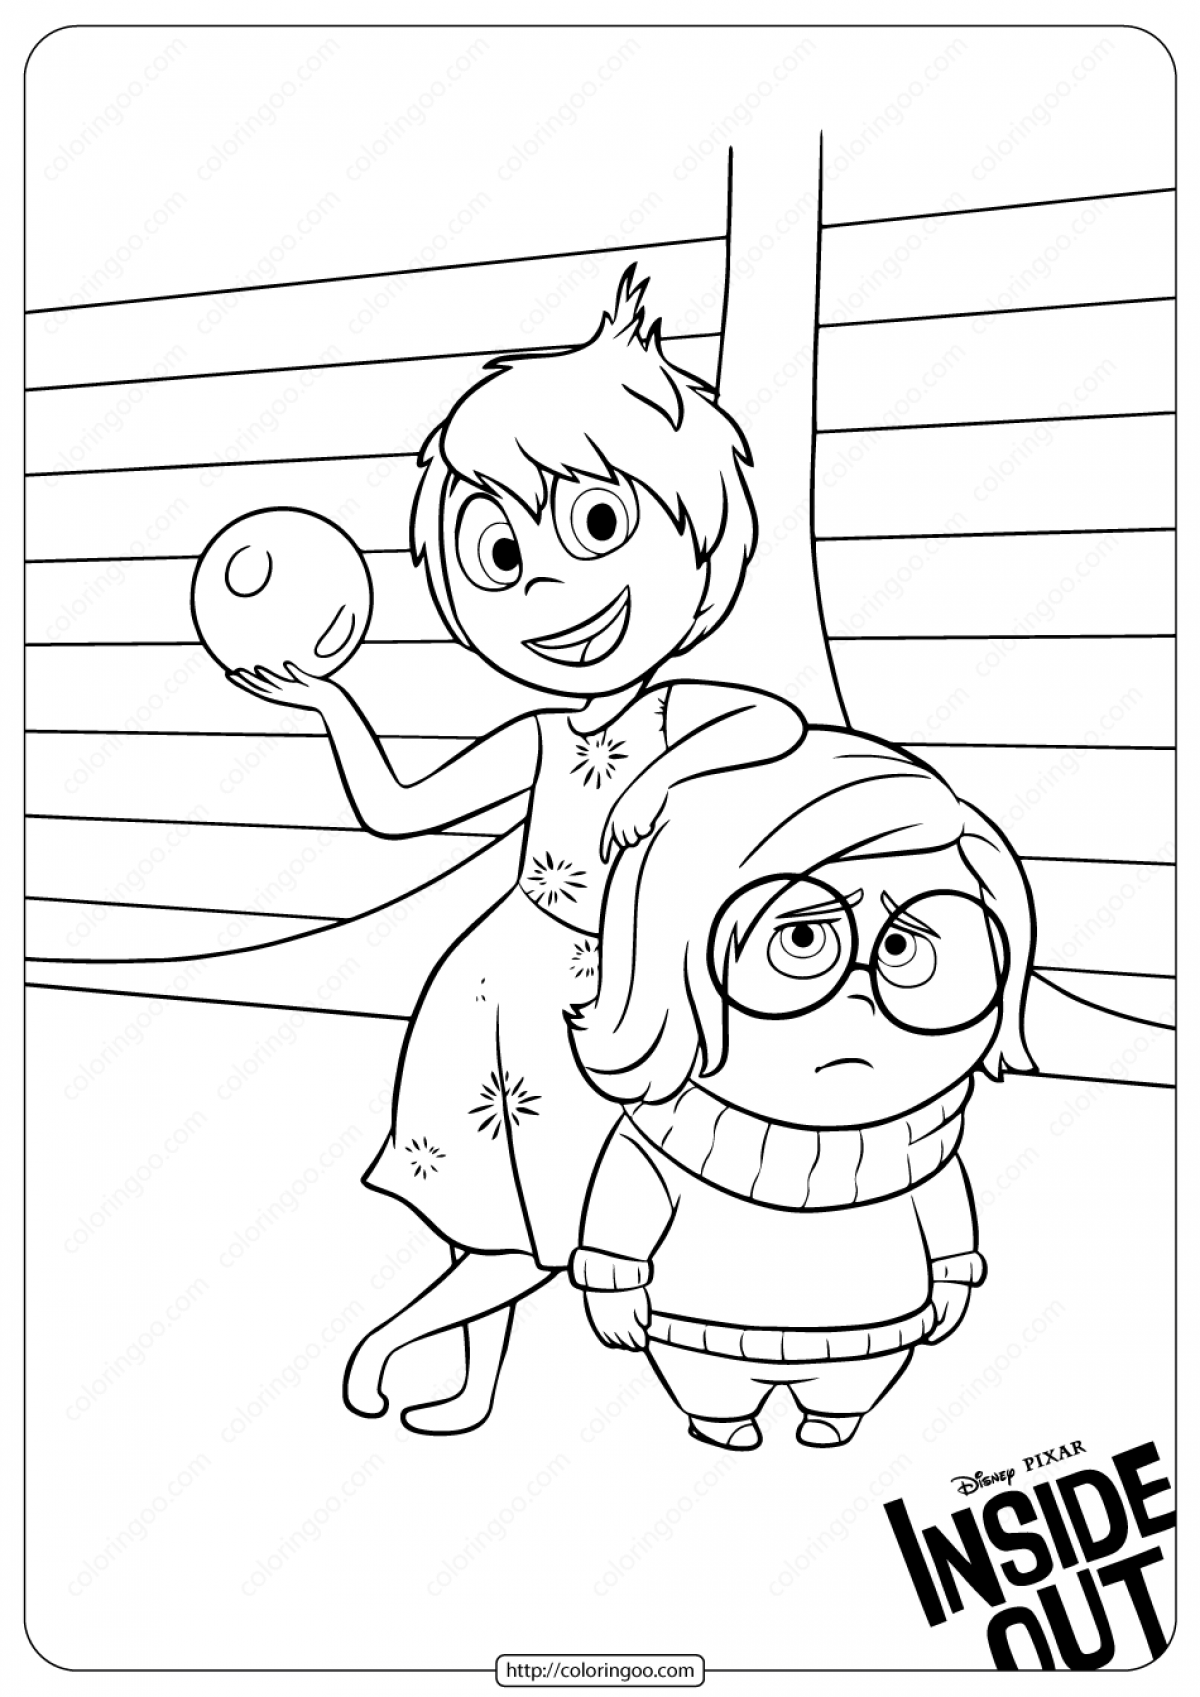 Sadness Coloring Pages - Coloring Home